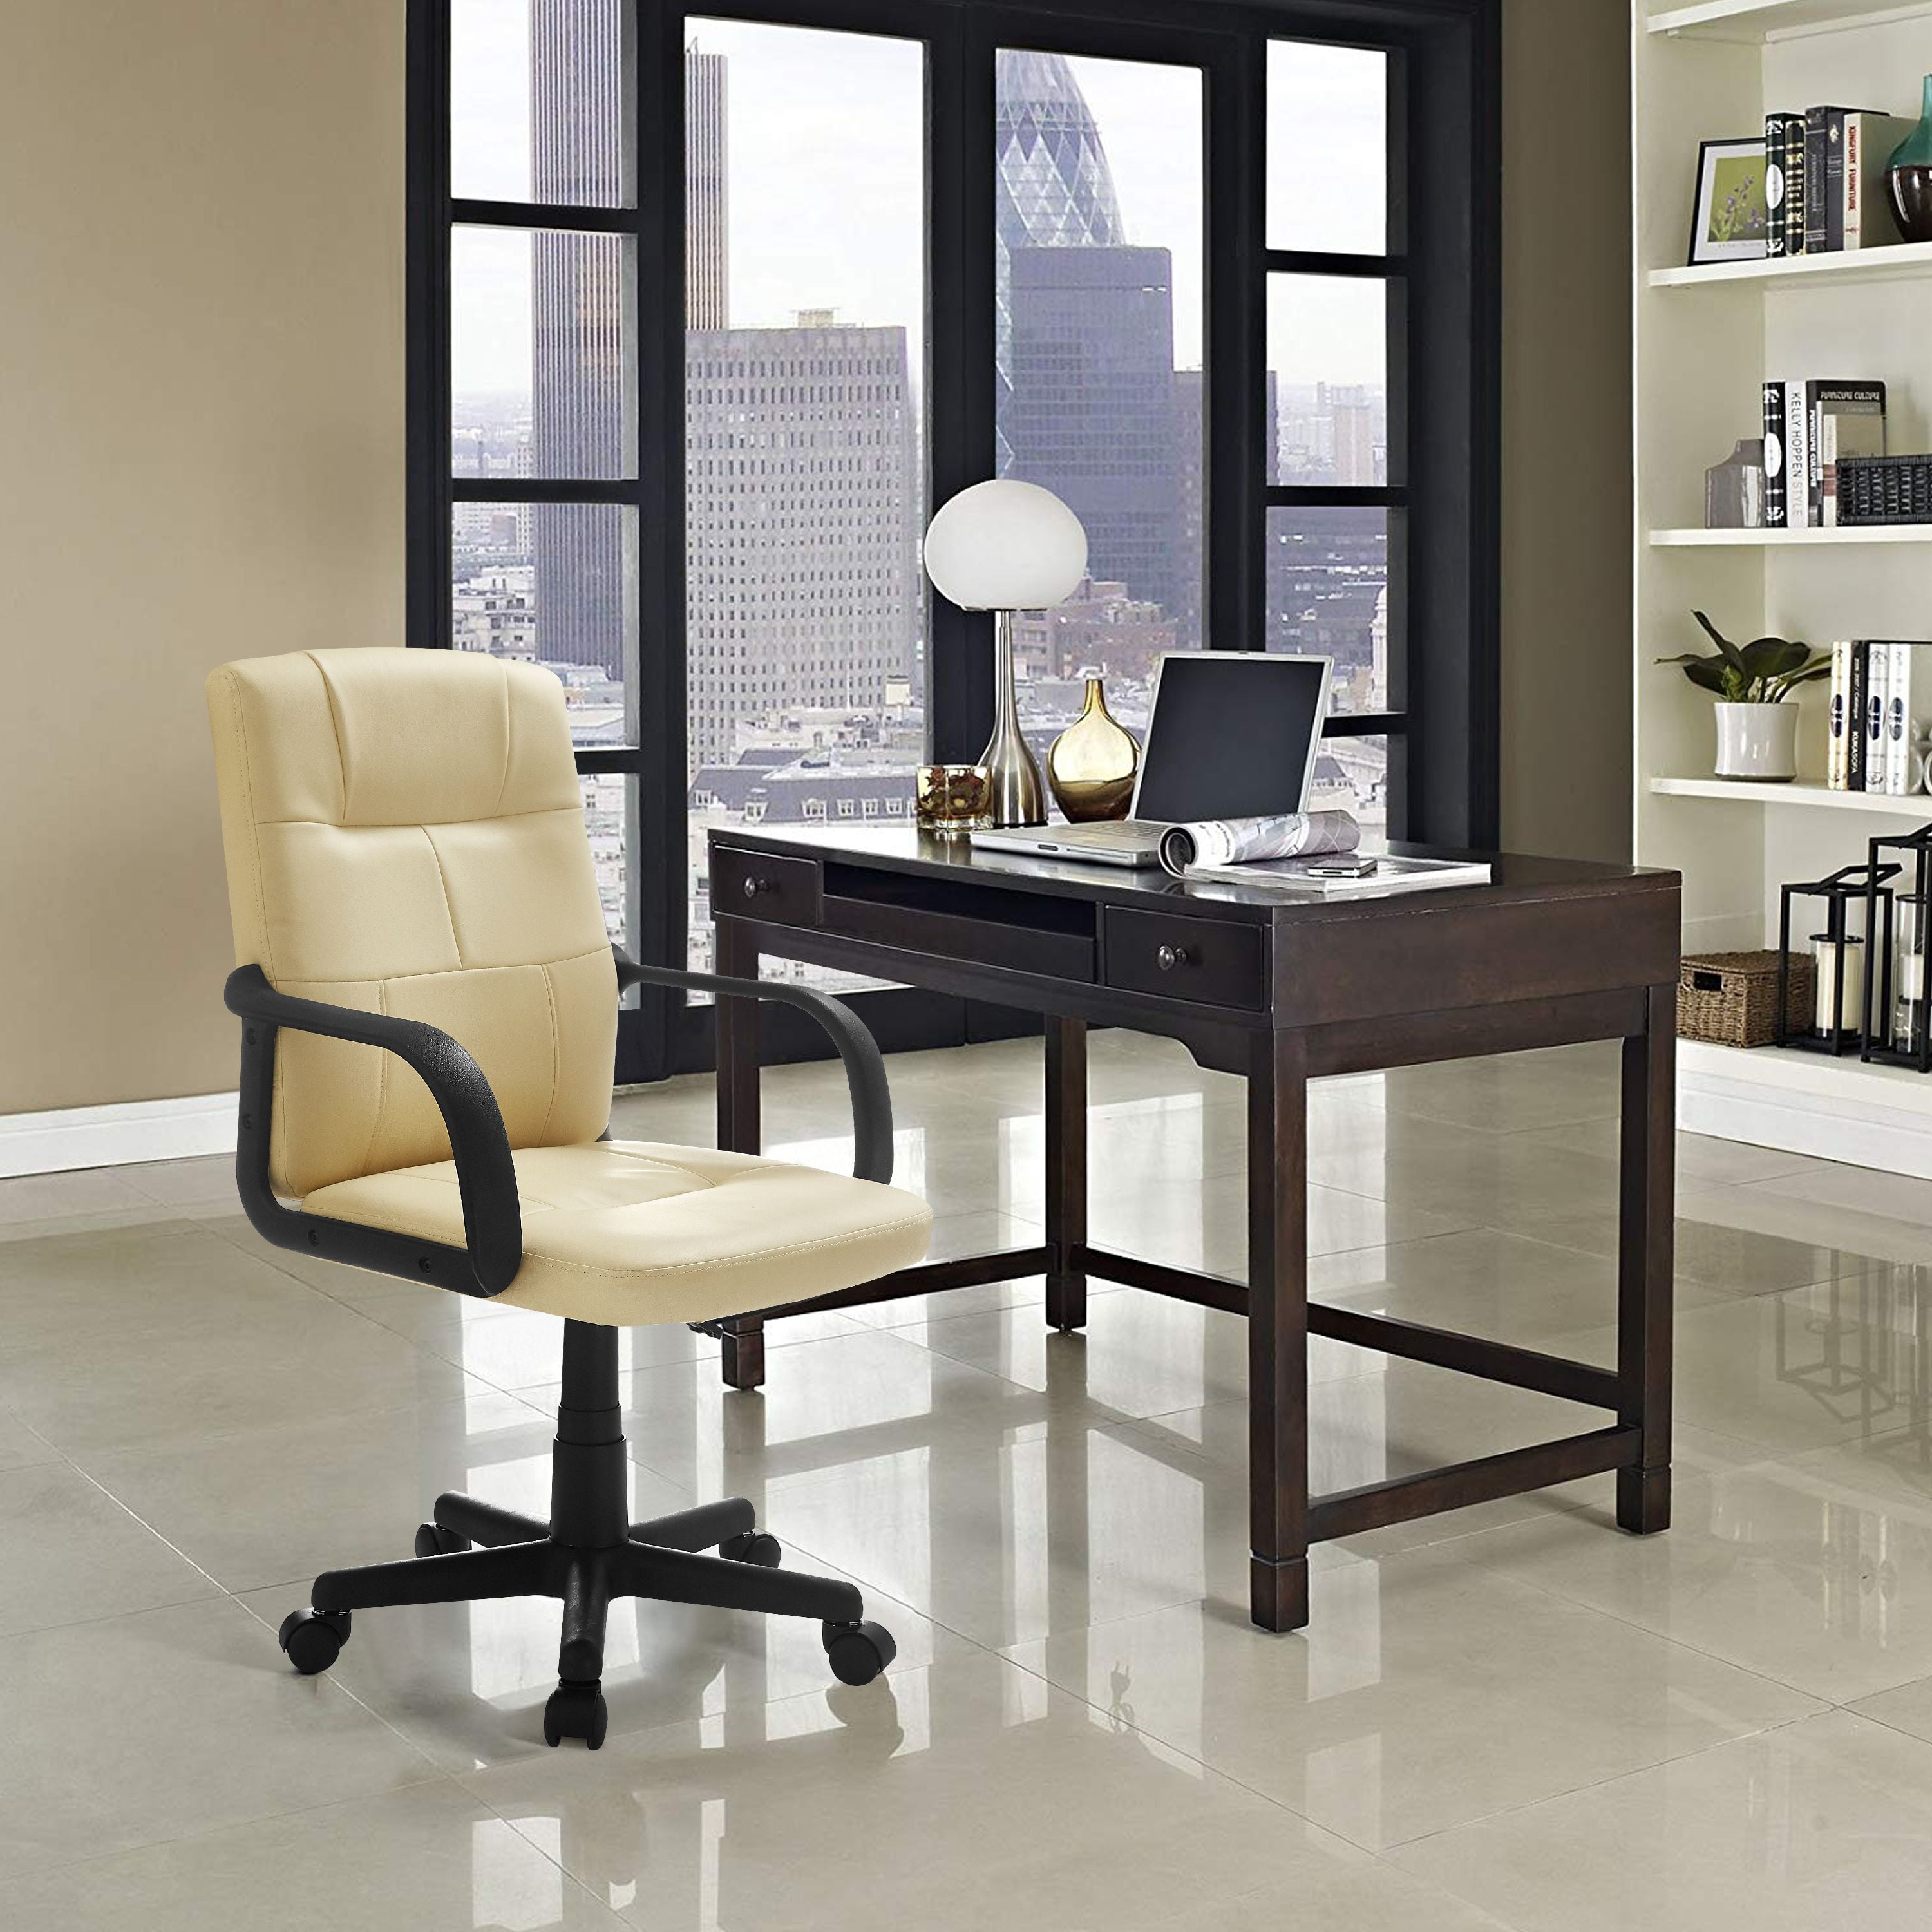 Mainstays Tufted Leather Mid-Back Rolling Office Chair - Walmart.com